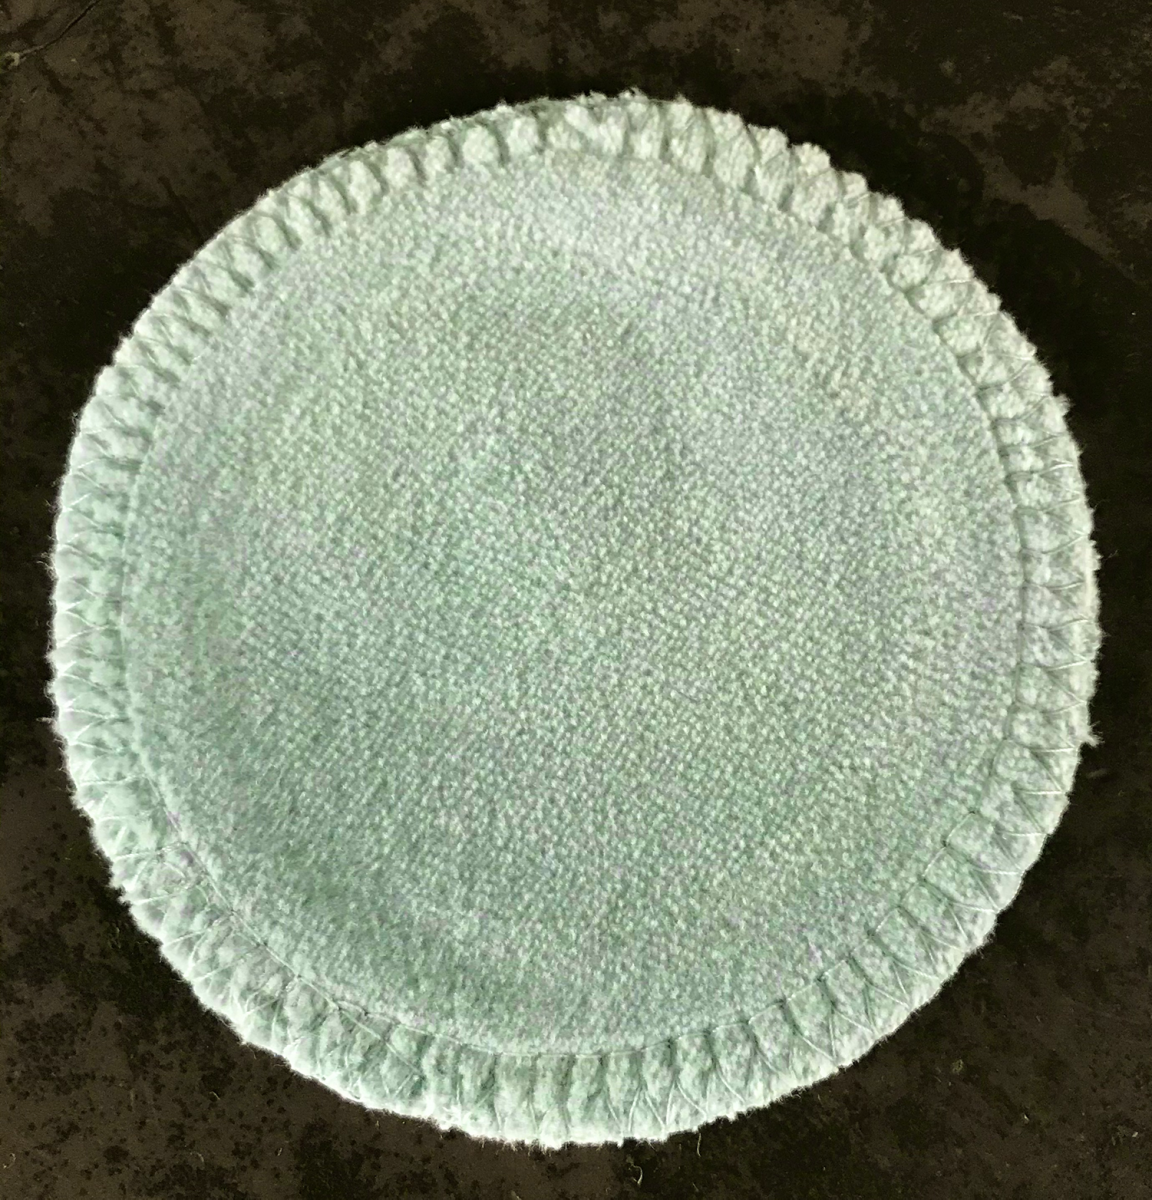 Facial cleaning pad 8 cm - mint-green